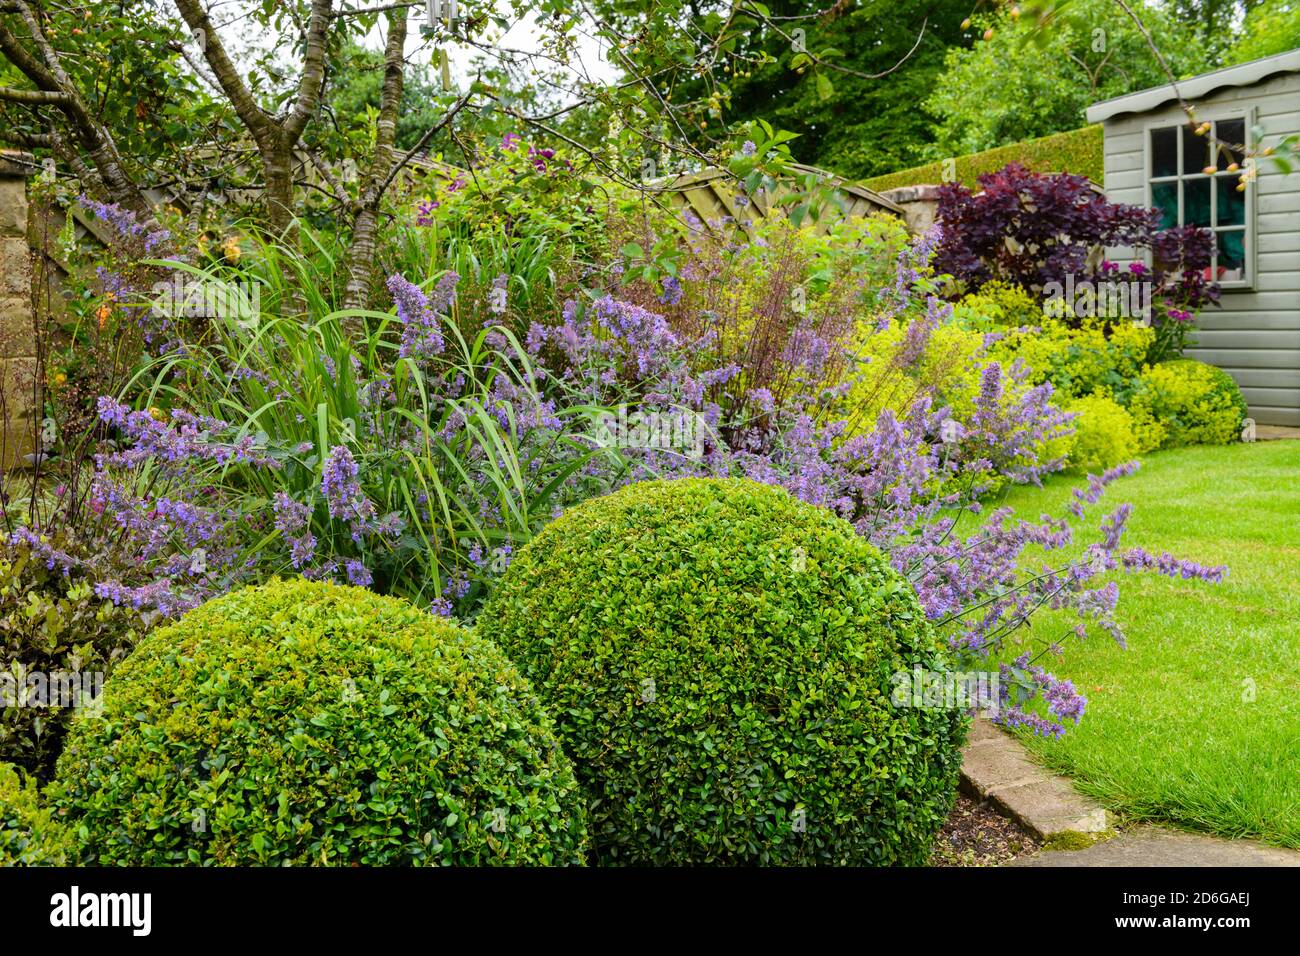 Landscaped private garden (contemporary design, summer flowers, border plants & shrubs, summerhouse shed, box balls, lawn) - Yorkshire, England, UK. Stock Photo